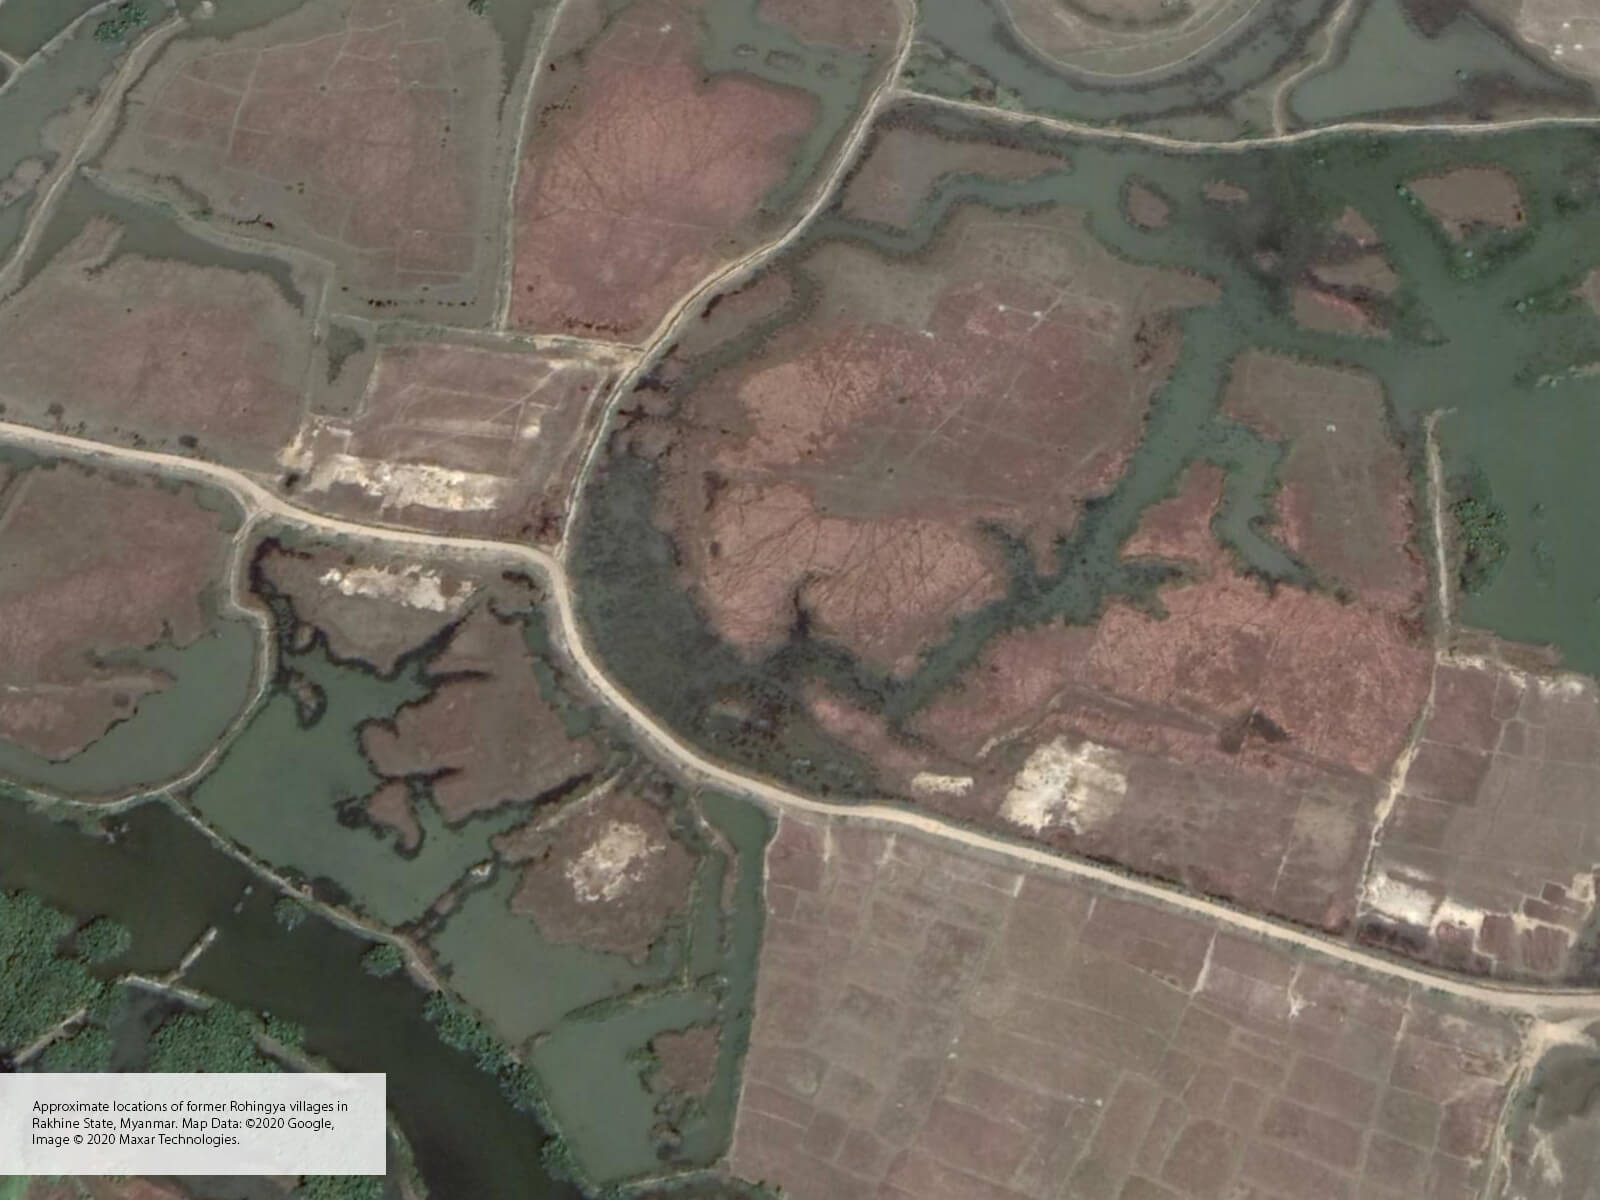 Satellite image of fields and roads and what seems to be demolished buildings